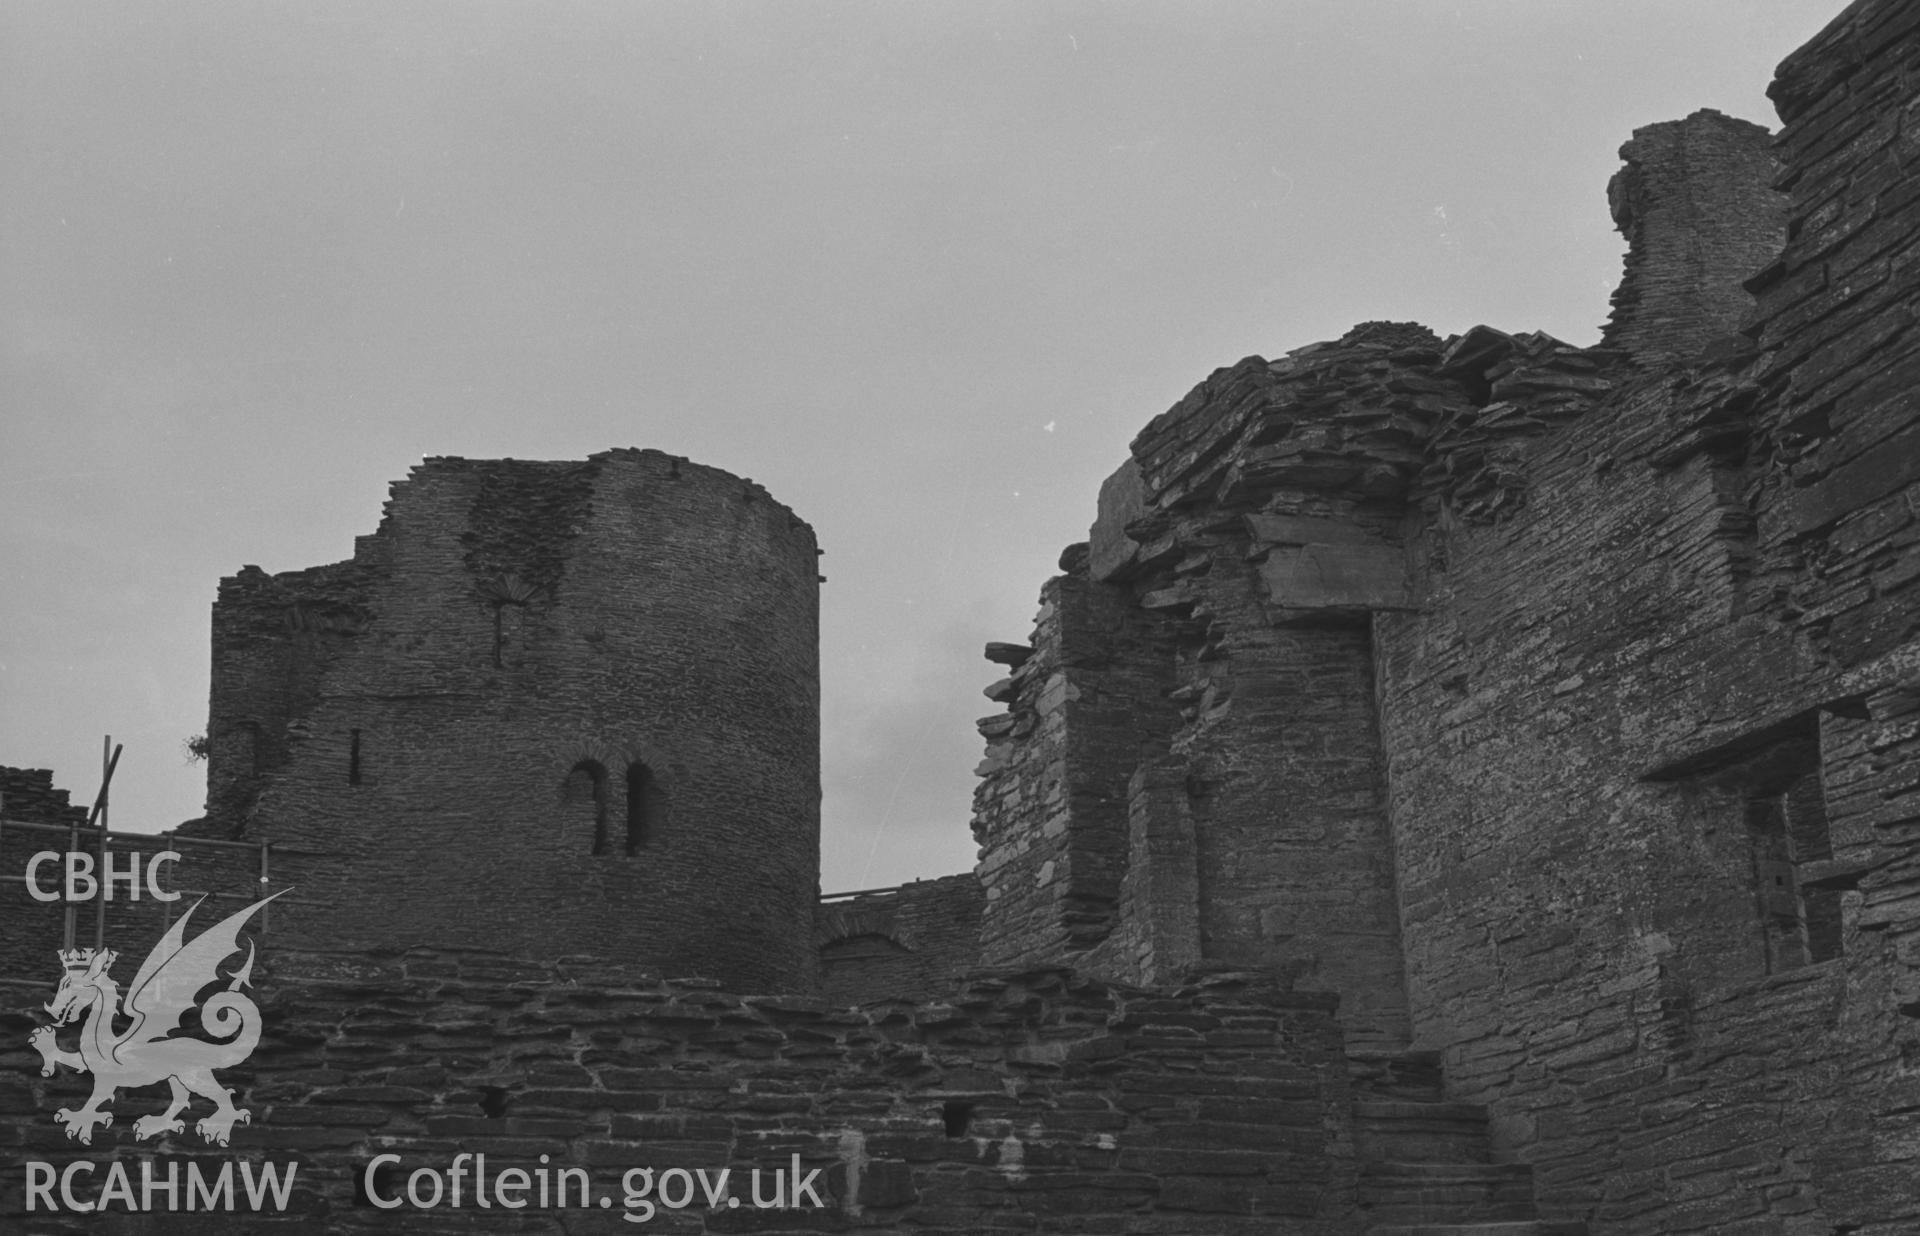 Digital copy of a black and white negative showing view from inside Cilgerran castle. Photographed in September 1963 by Arthur O. Chater.